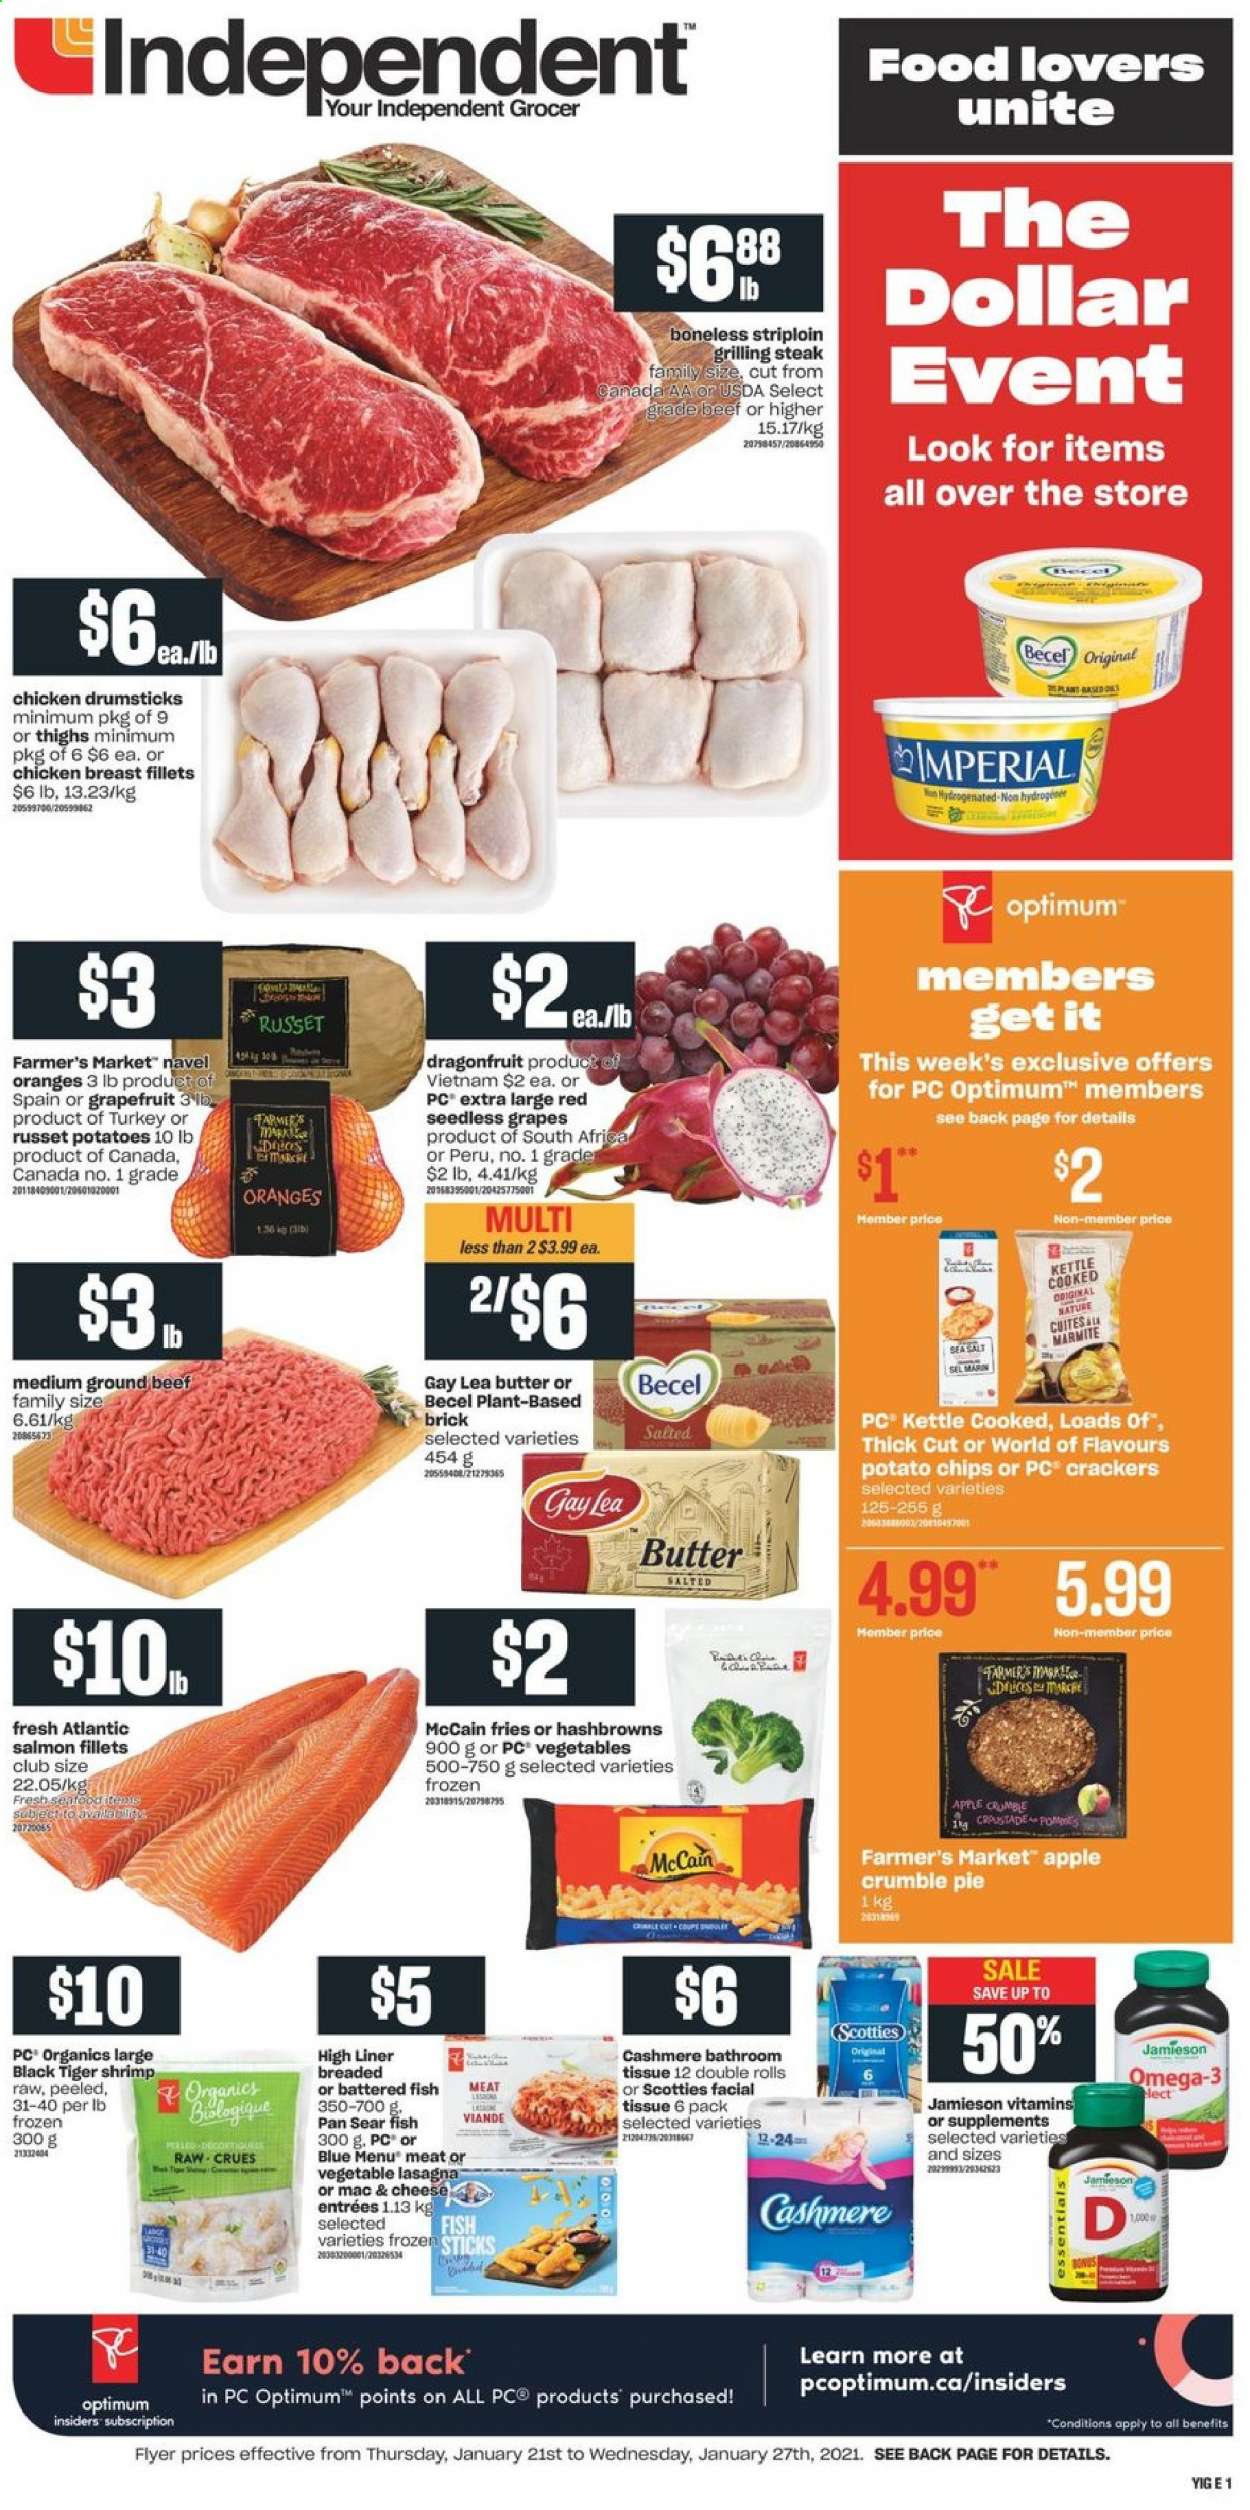 thumbnail - Independent Flyer - January 21, 2021 - January 27, 2021 - Sales products - Apple, pie, russet potatoes, grapefruits, grapes, seedless grapes, navel oranges, salmon, salmon fillet, fish, shrimps, lasagna meal, butter, McCain, hash browns, potato fries, crackers, potato chips, chicken drumsticks, chicken, beef meat, ground beef, bath tissue, pan, Optimum, Omega-3, steak. Page 1.